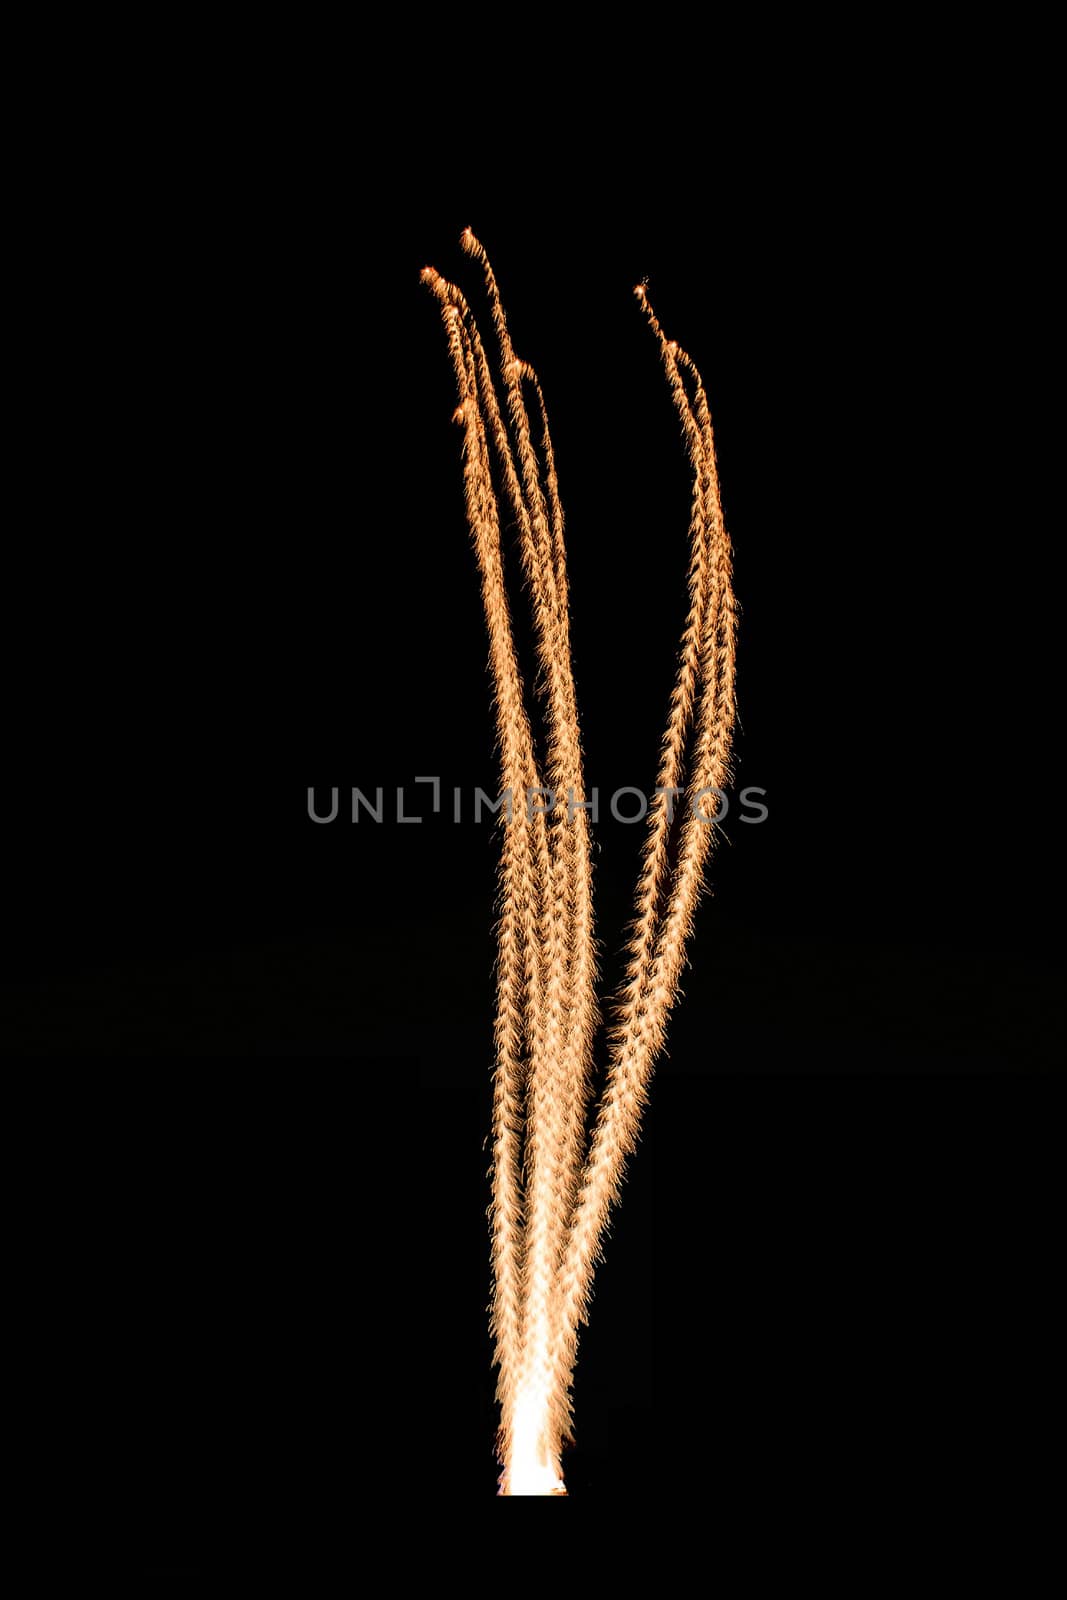 Real isolated firework, anti-missile flare or swirling rocket trail pattern by victorflowerfly